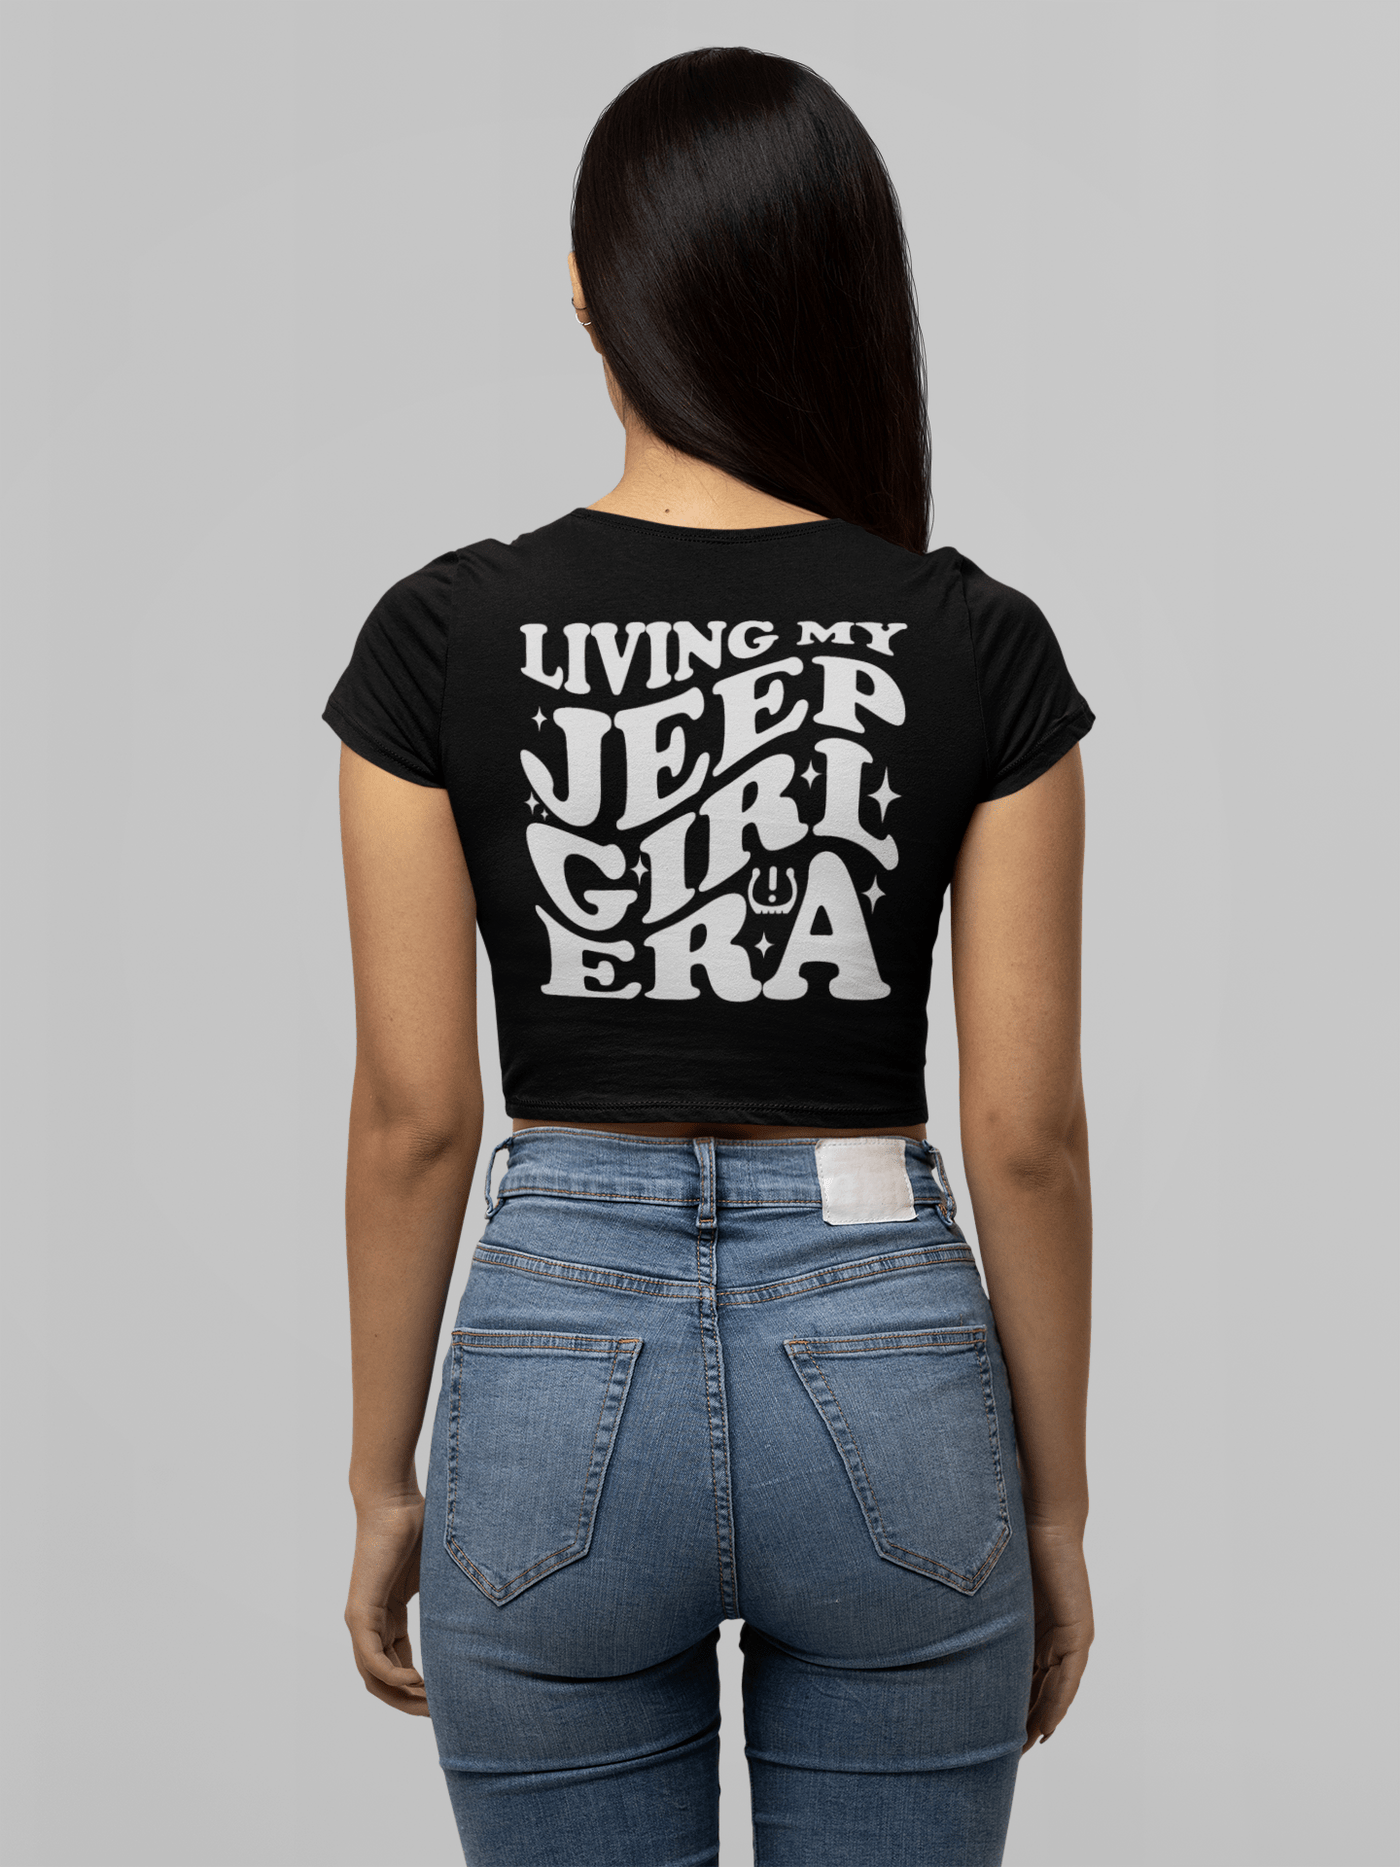 She Jeeps Living My Jeep Girl Era Crop Top - Goats Trail Off-Road Apparel Company